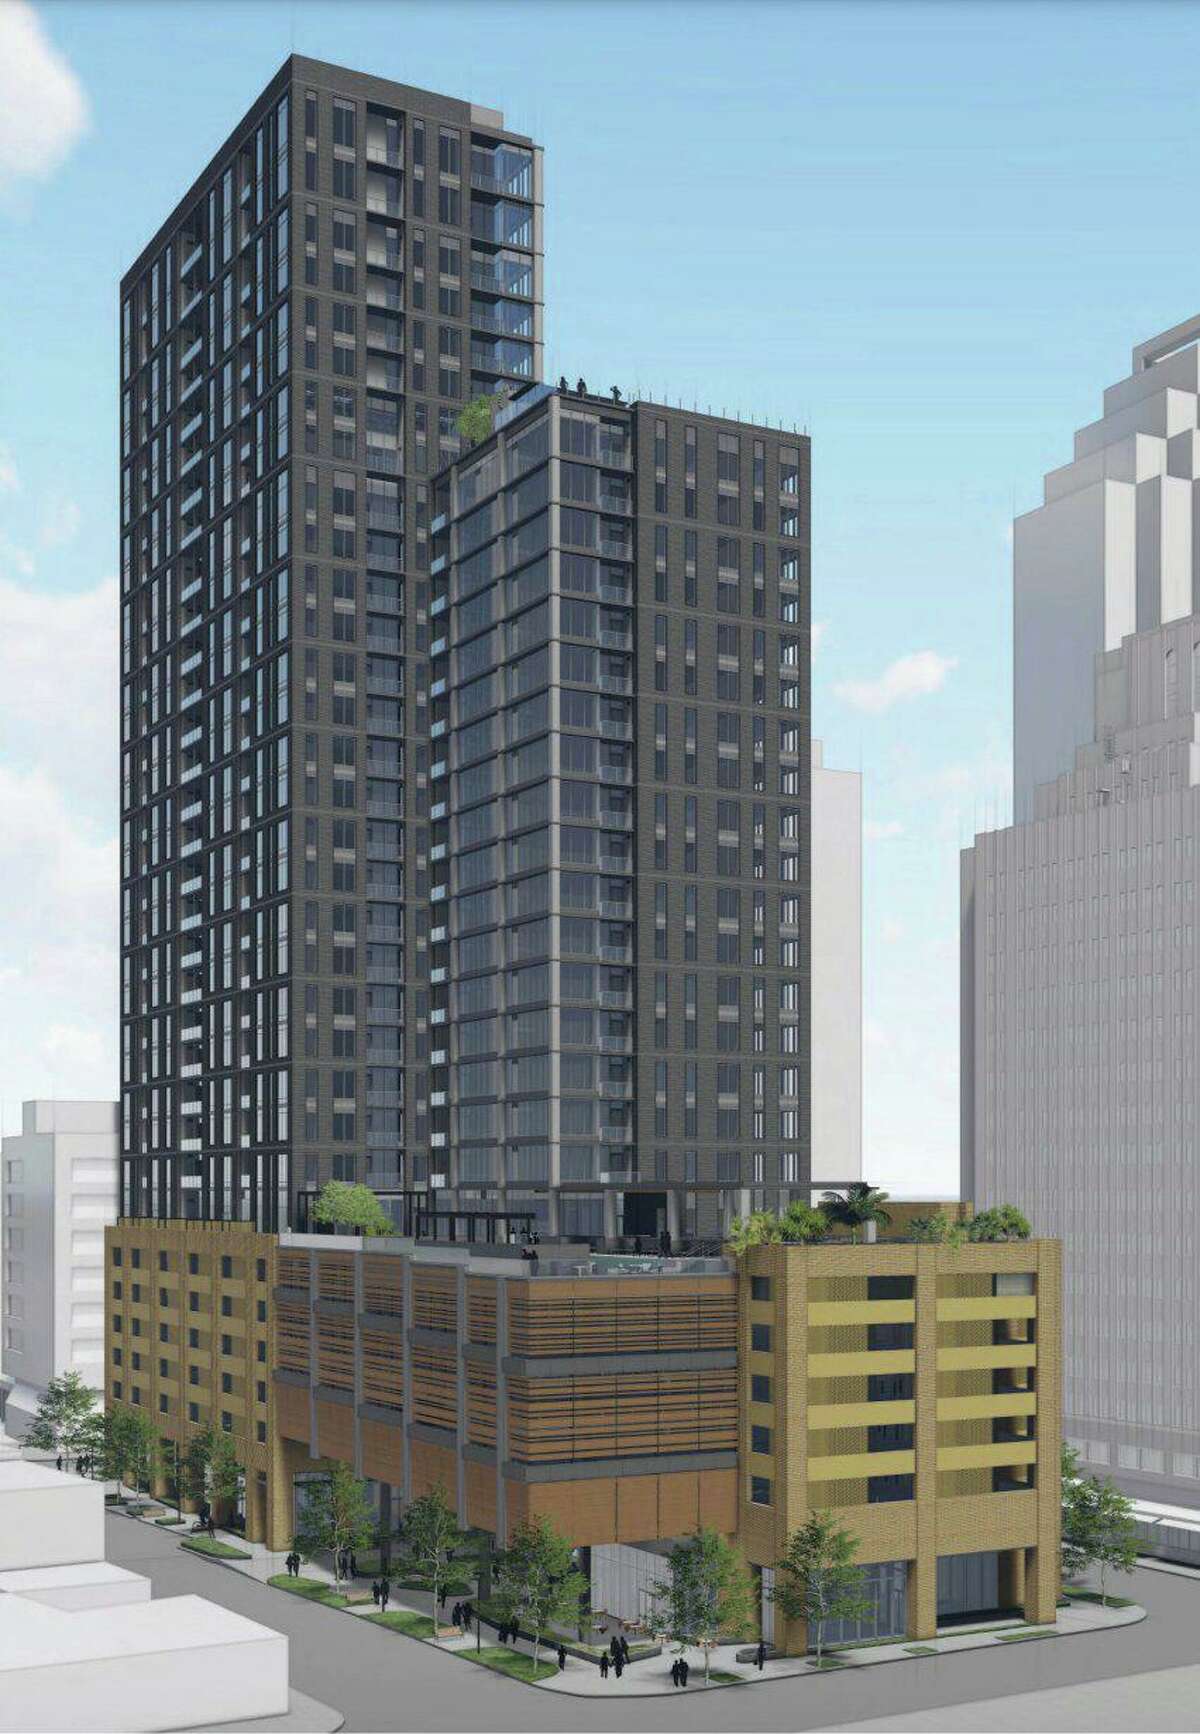 Renderings show the residential tower that Weston Urban plans to build at 305 Soledad Street in downtown.